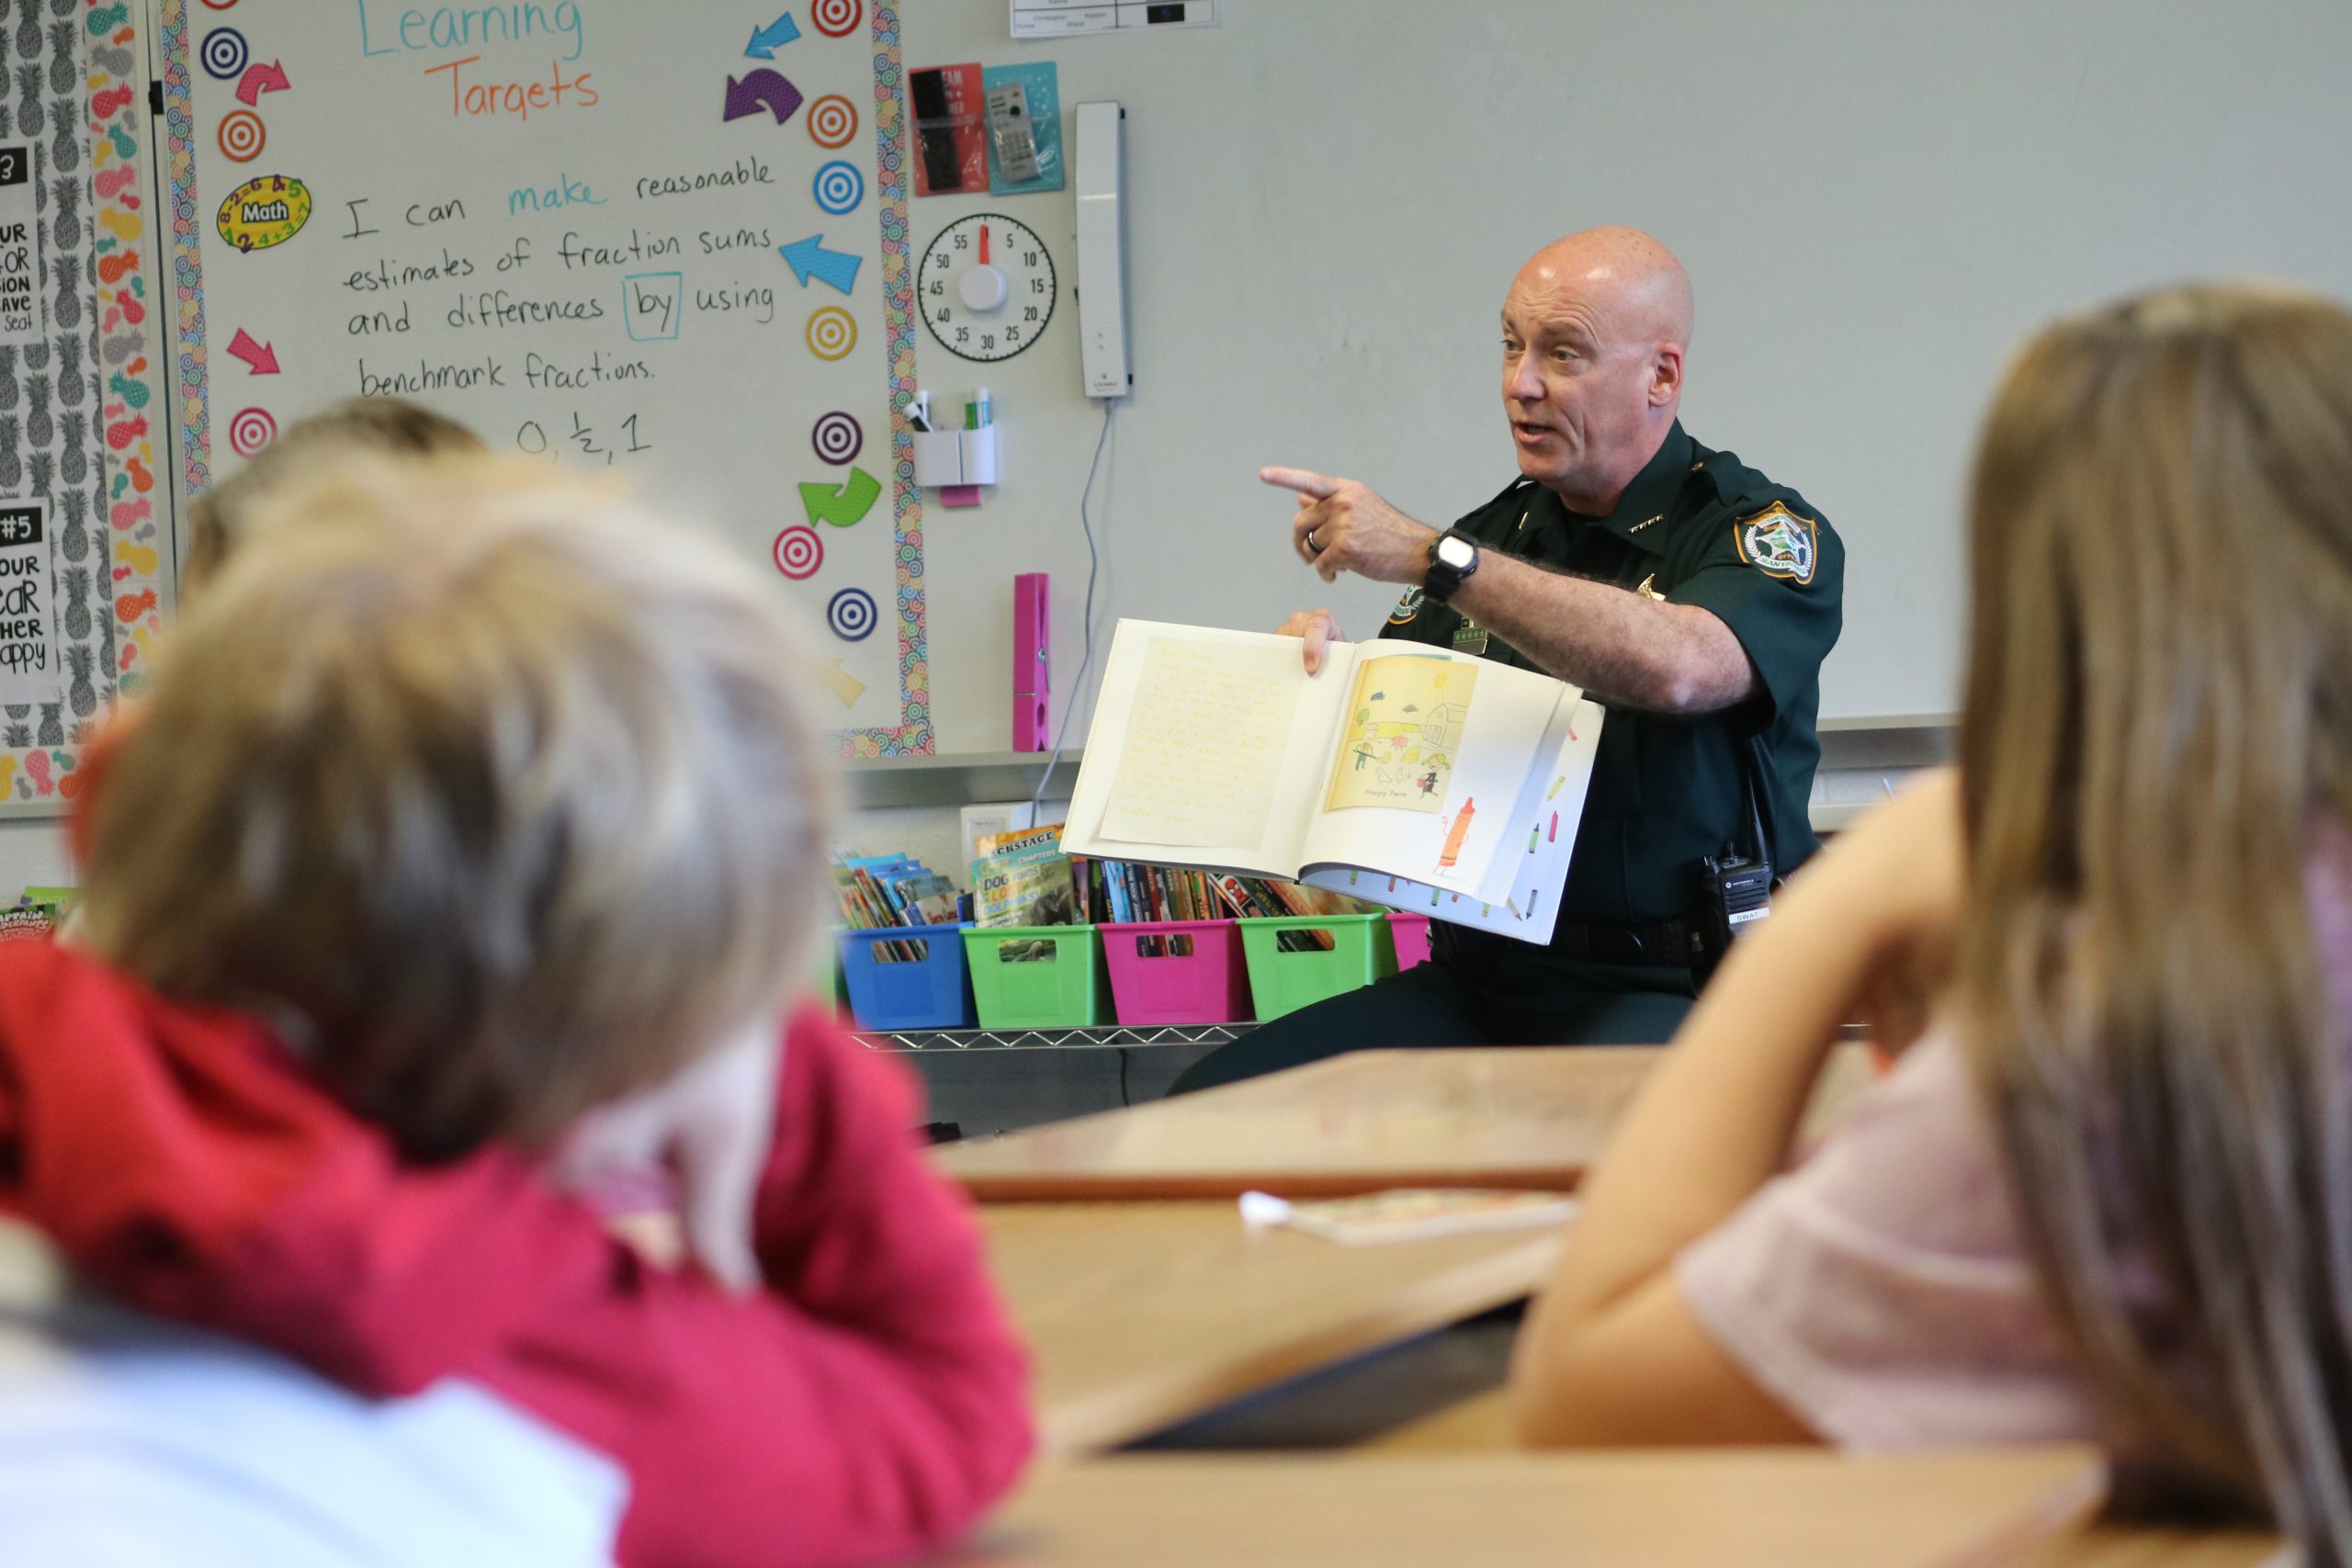 A police officer reading a book to elementary school children in a classroom, pointing at the book while explaining.